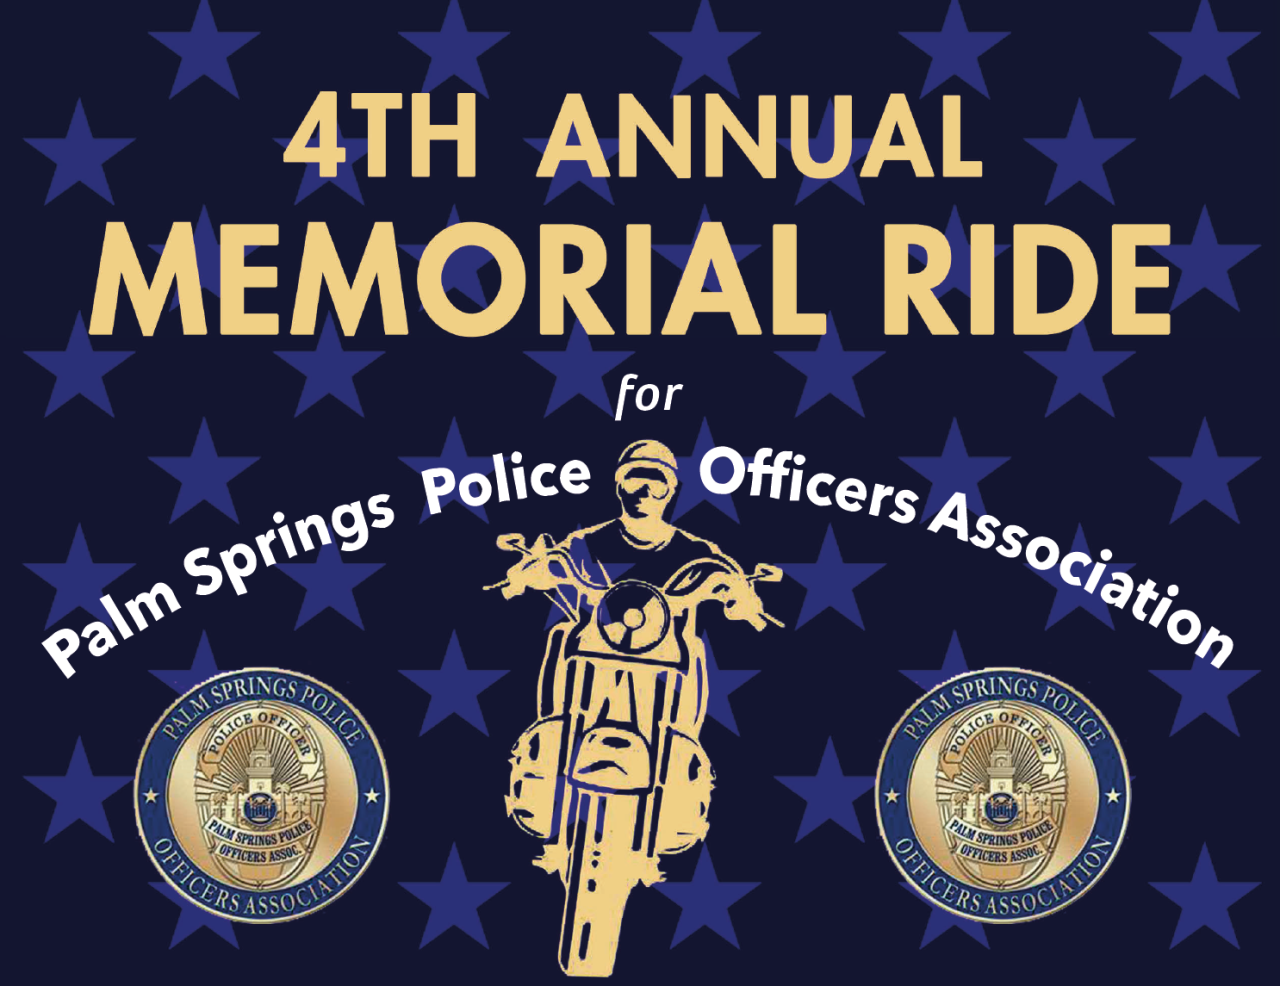 Join us for the 4th Annual Memorial Ride on Nov 12, 2022